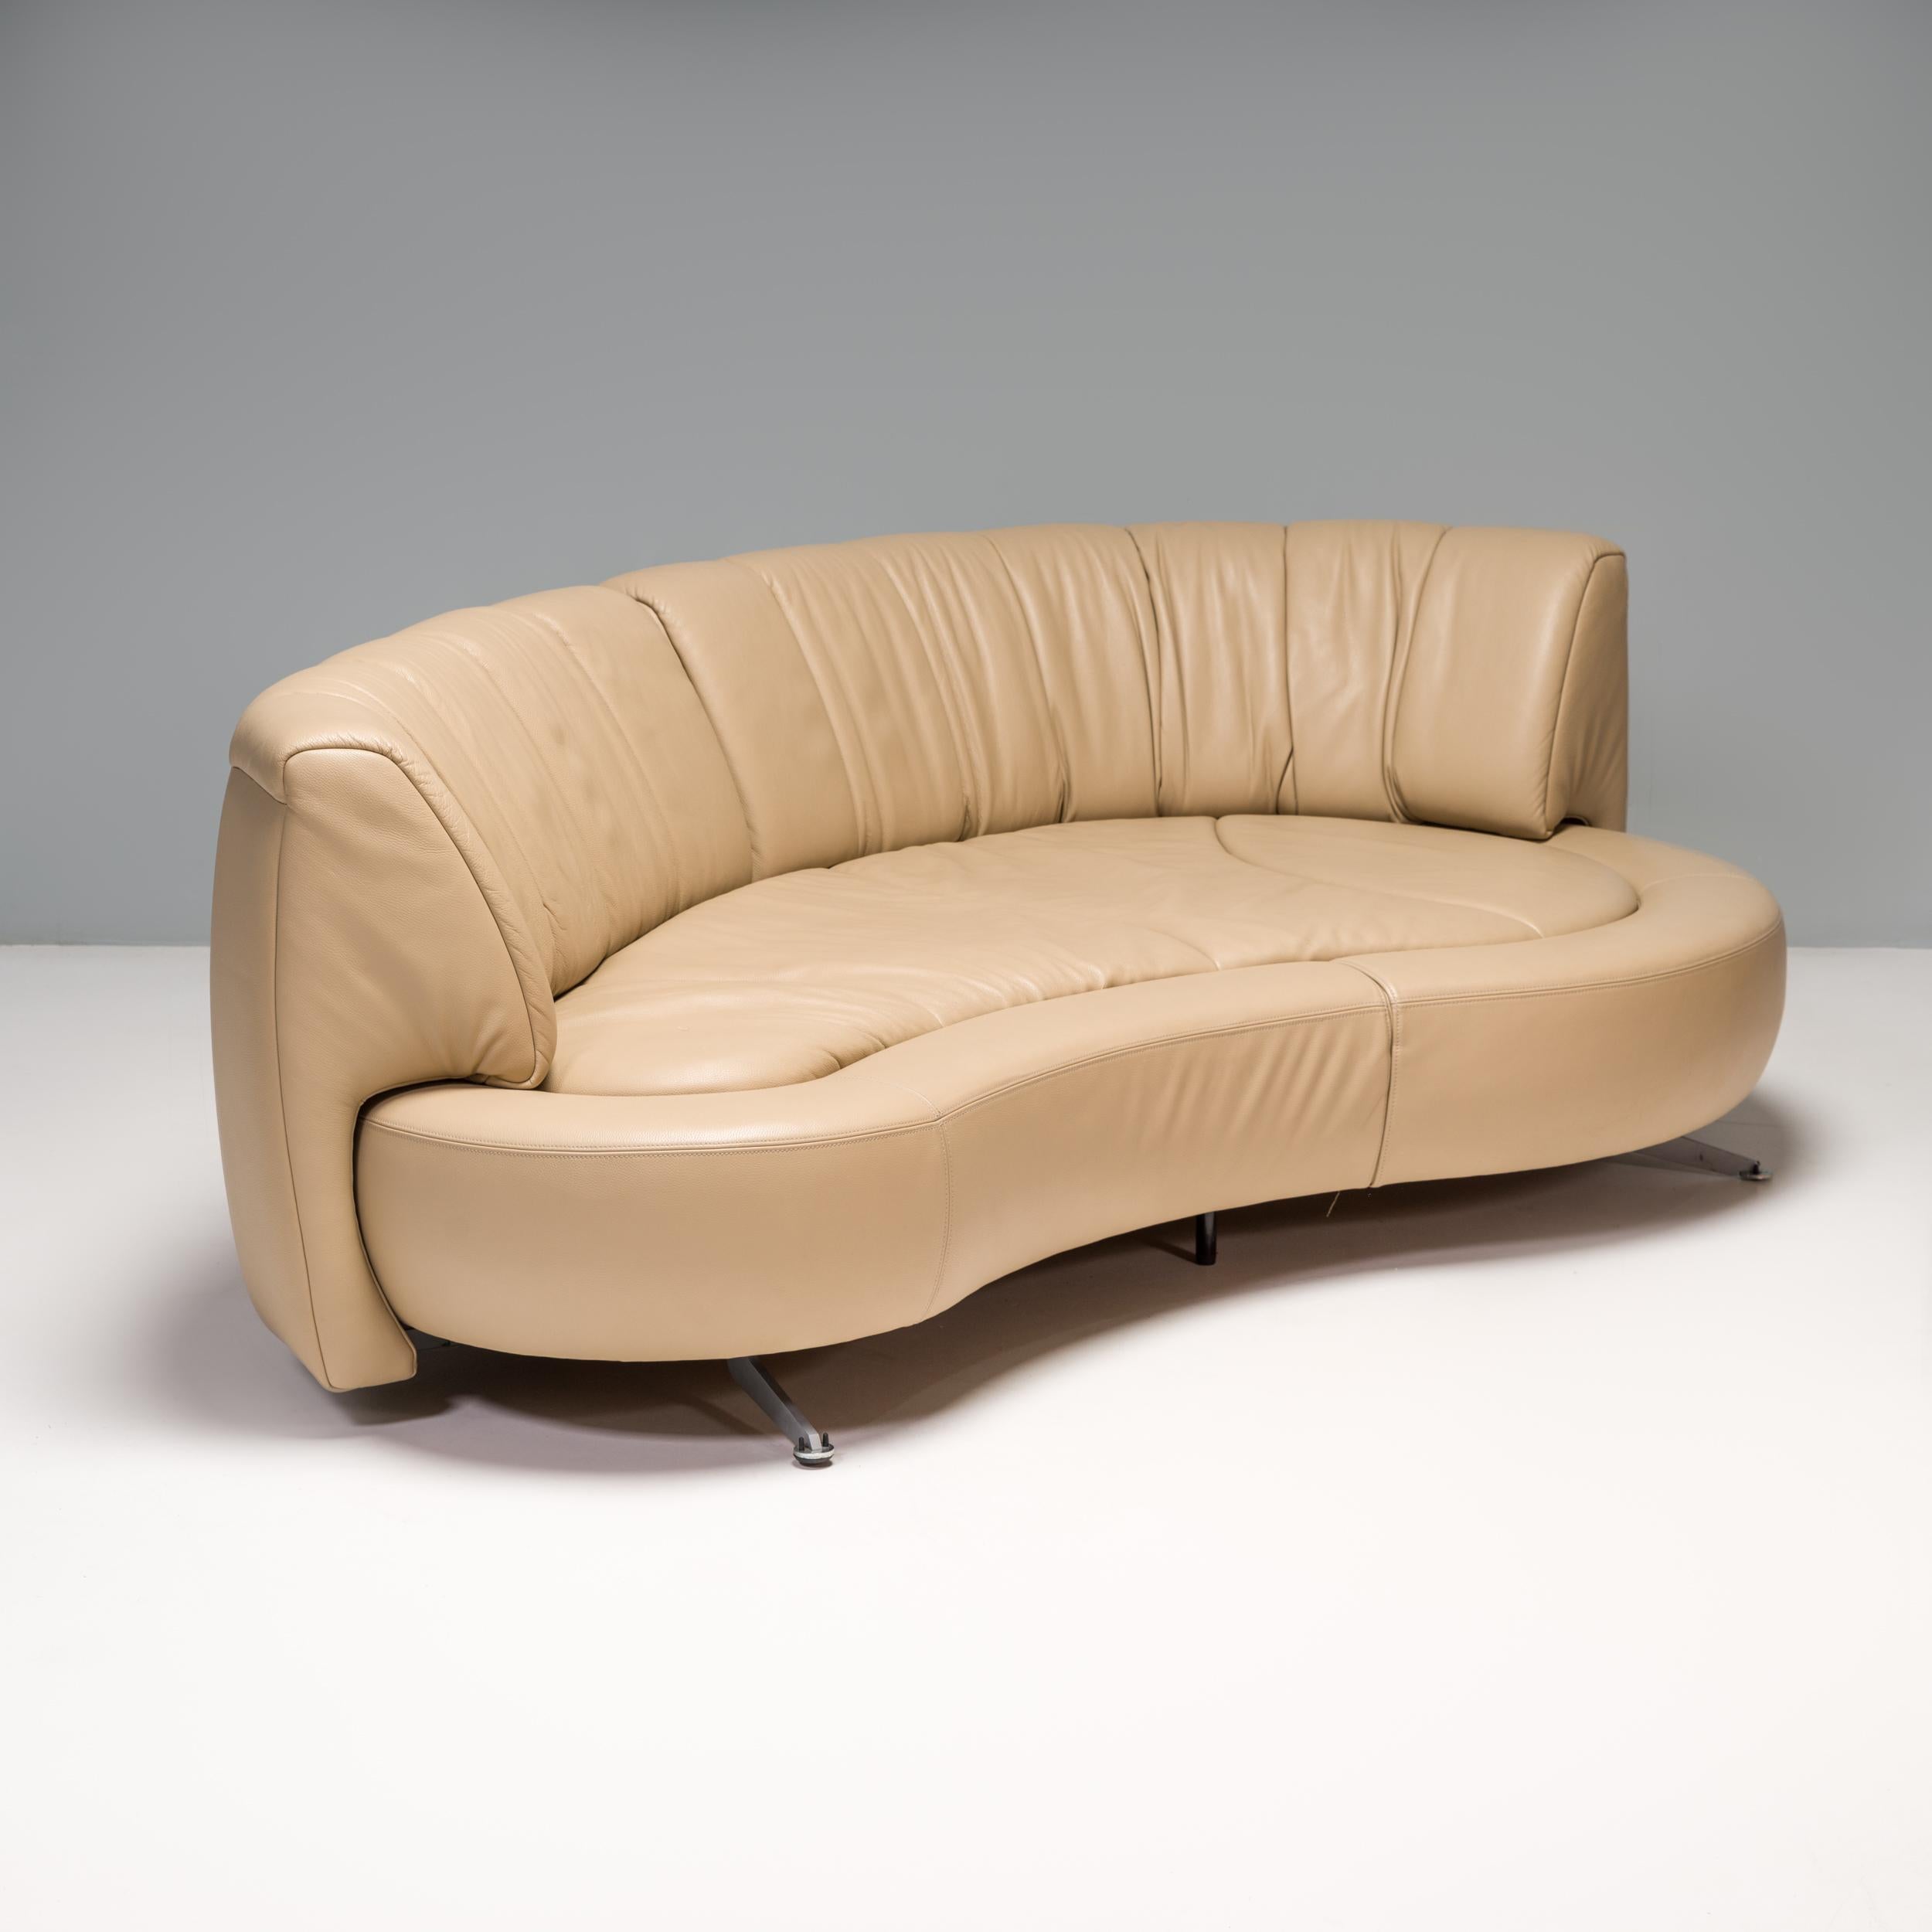 Designed by Hugo de Ruiter for De Sede, the DS-164/29 sofa offers an innovative reinvention of the traditional seat.

The sofa is formed of a central island with a curved and organic Silhouette which allows for a deep and comfortable